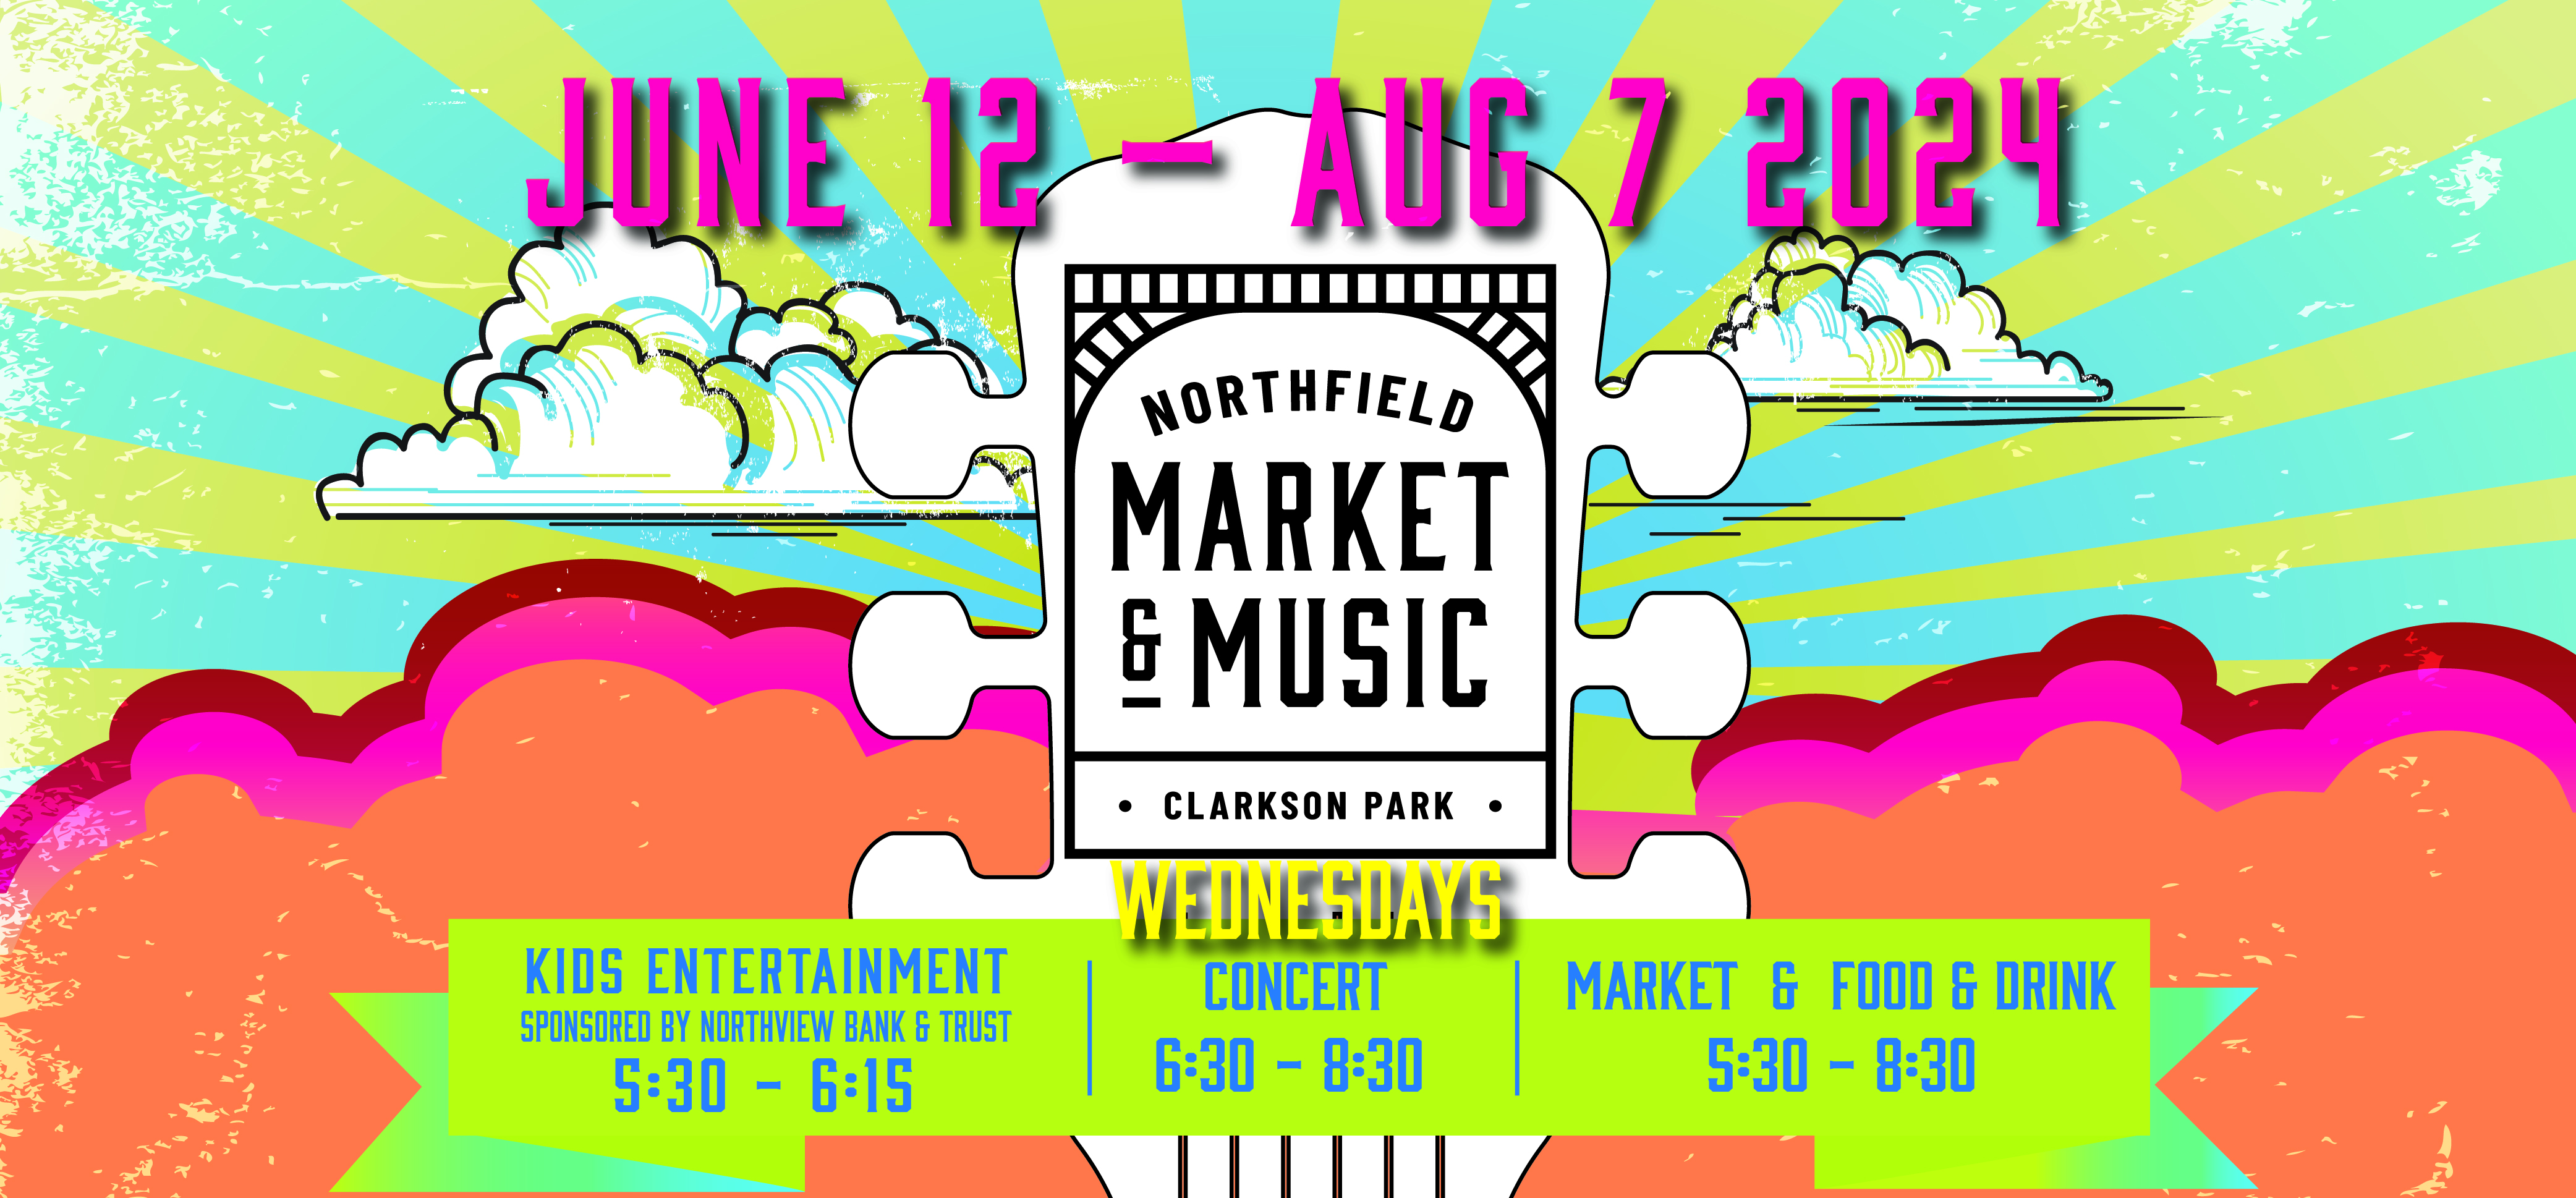 Market & Music on Wednesdays from 5:30-8:30PM